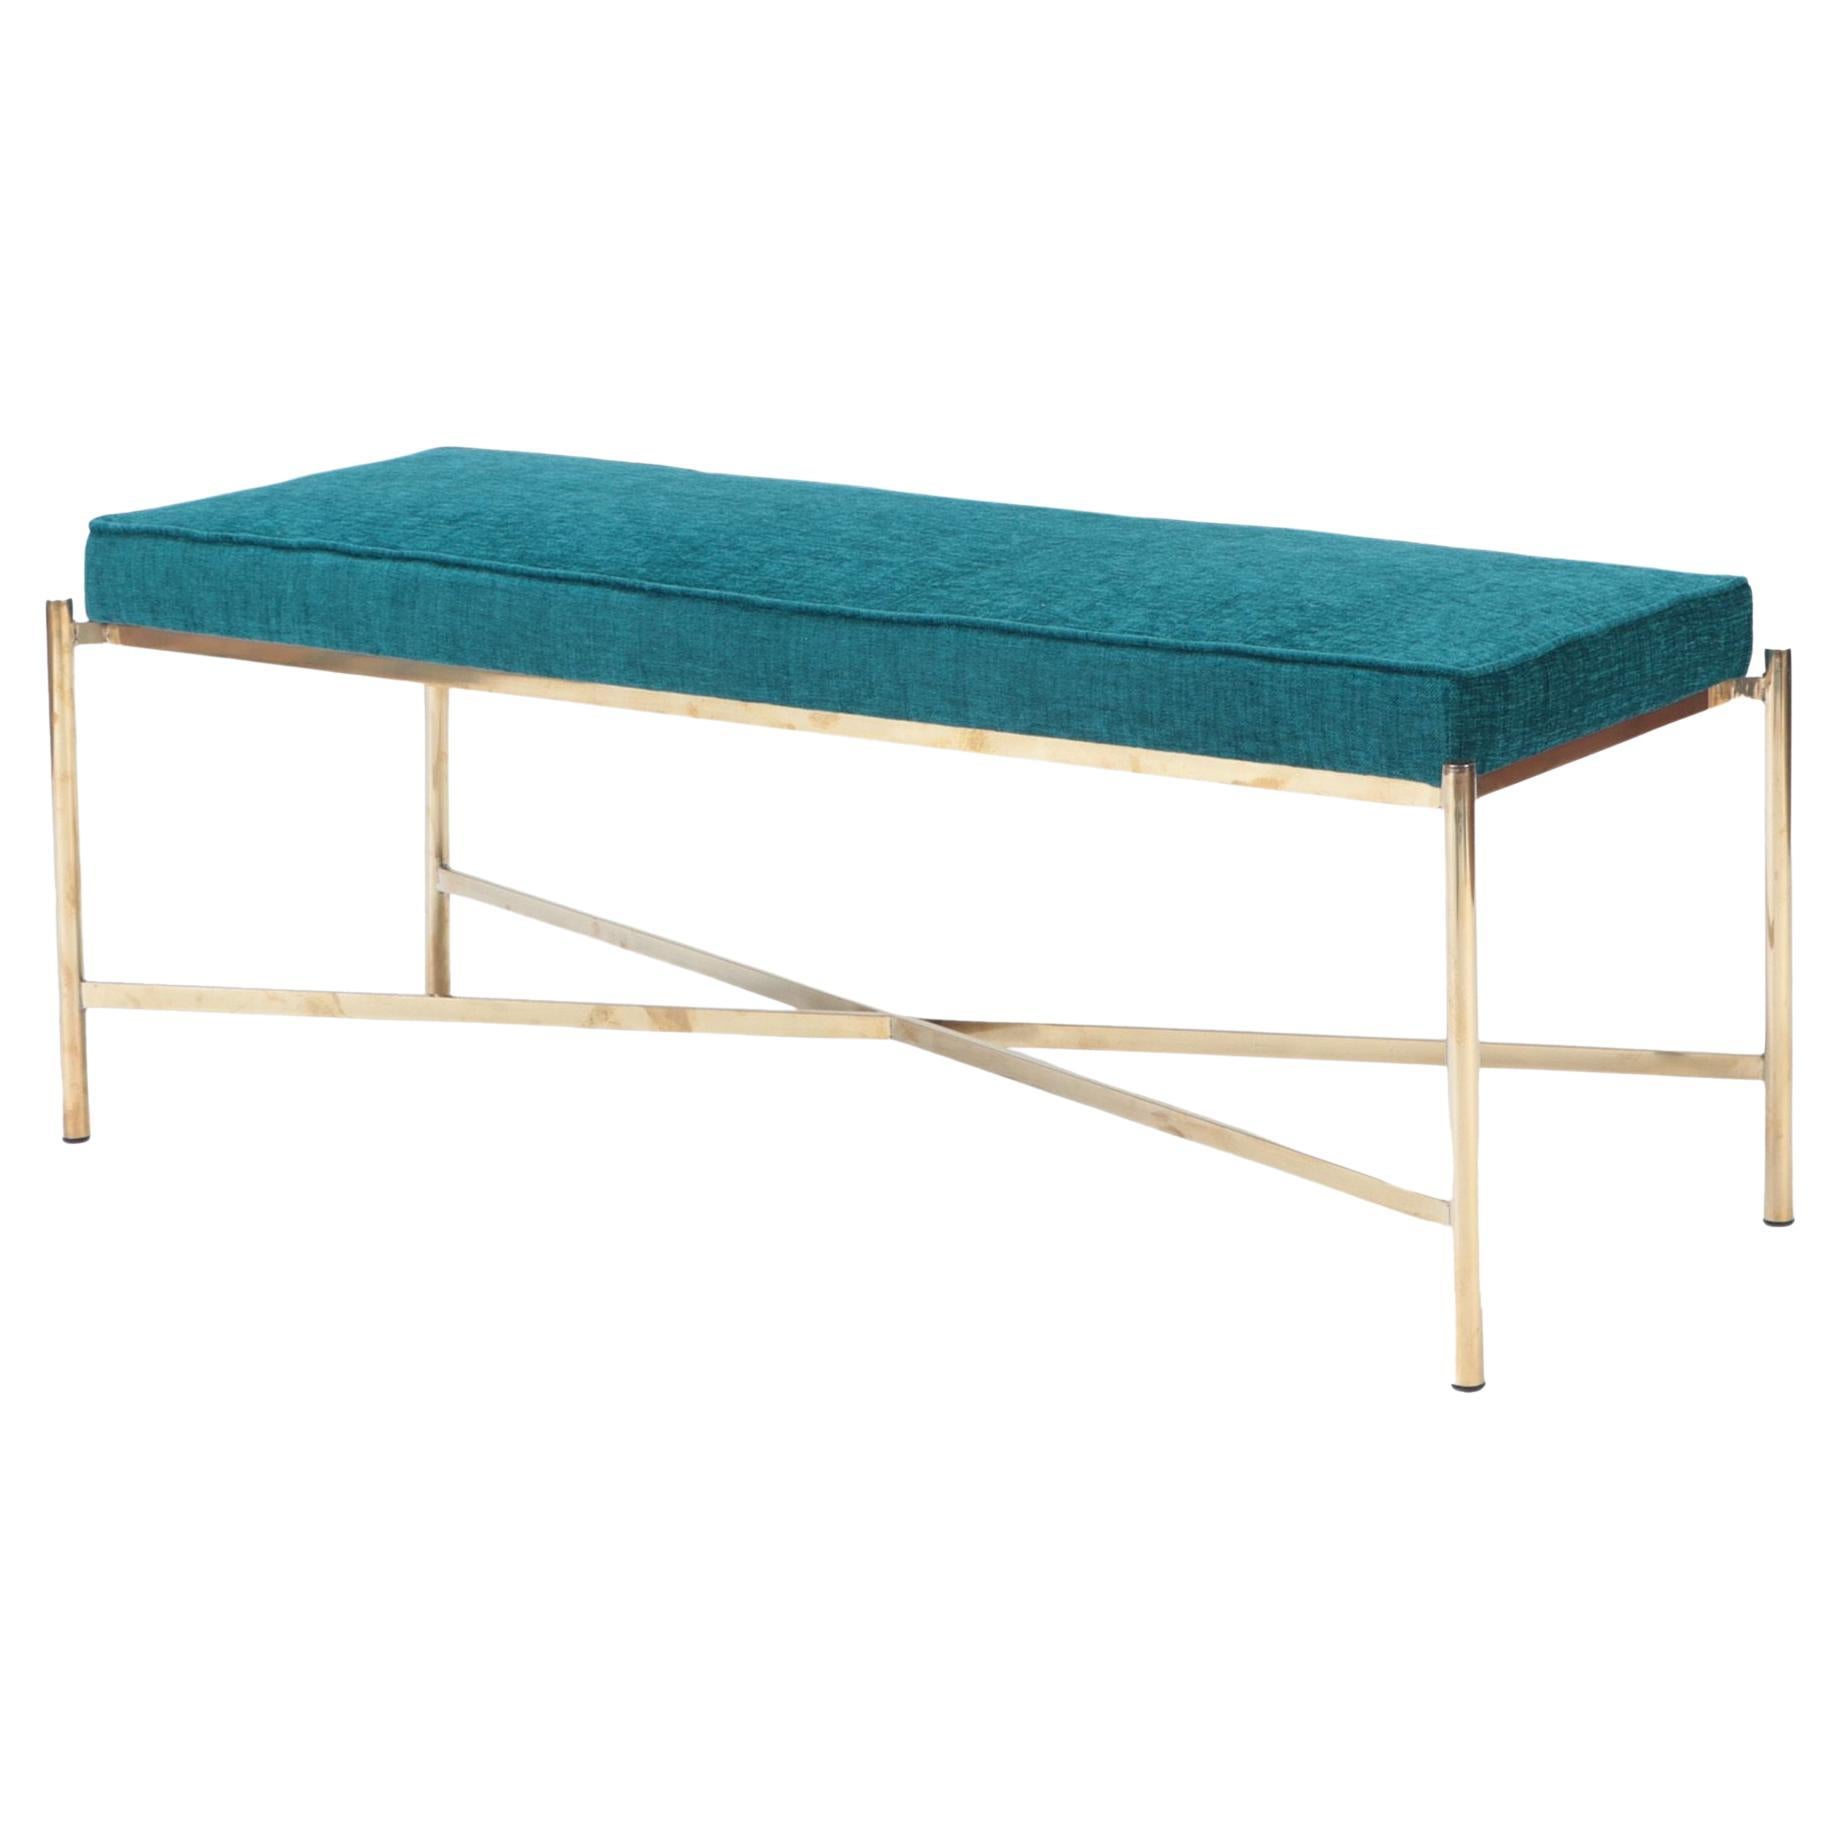 Italian Brass Bench with X for Base, Contemporary